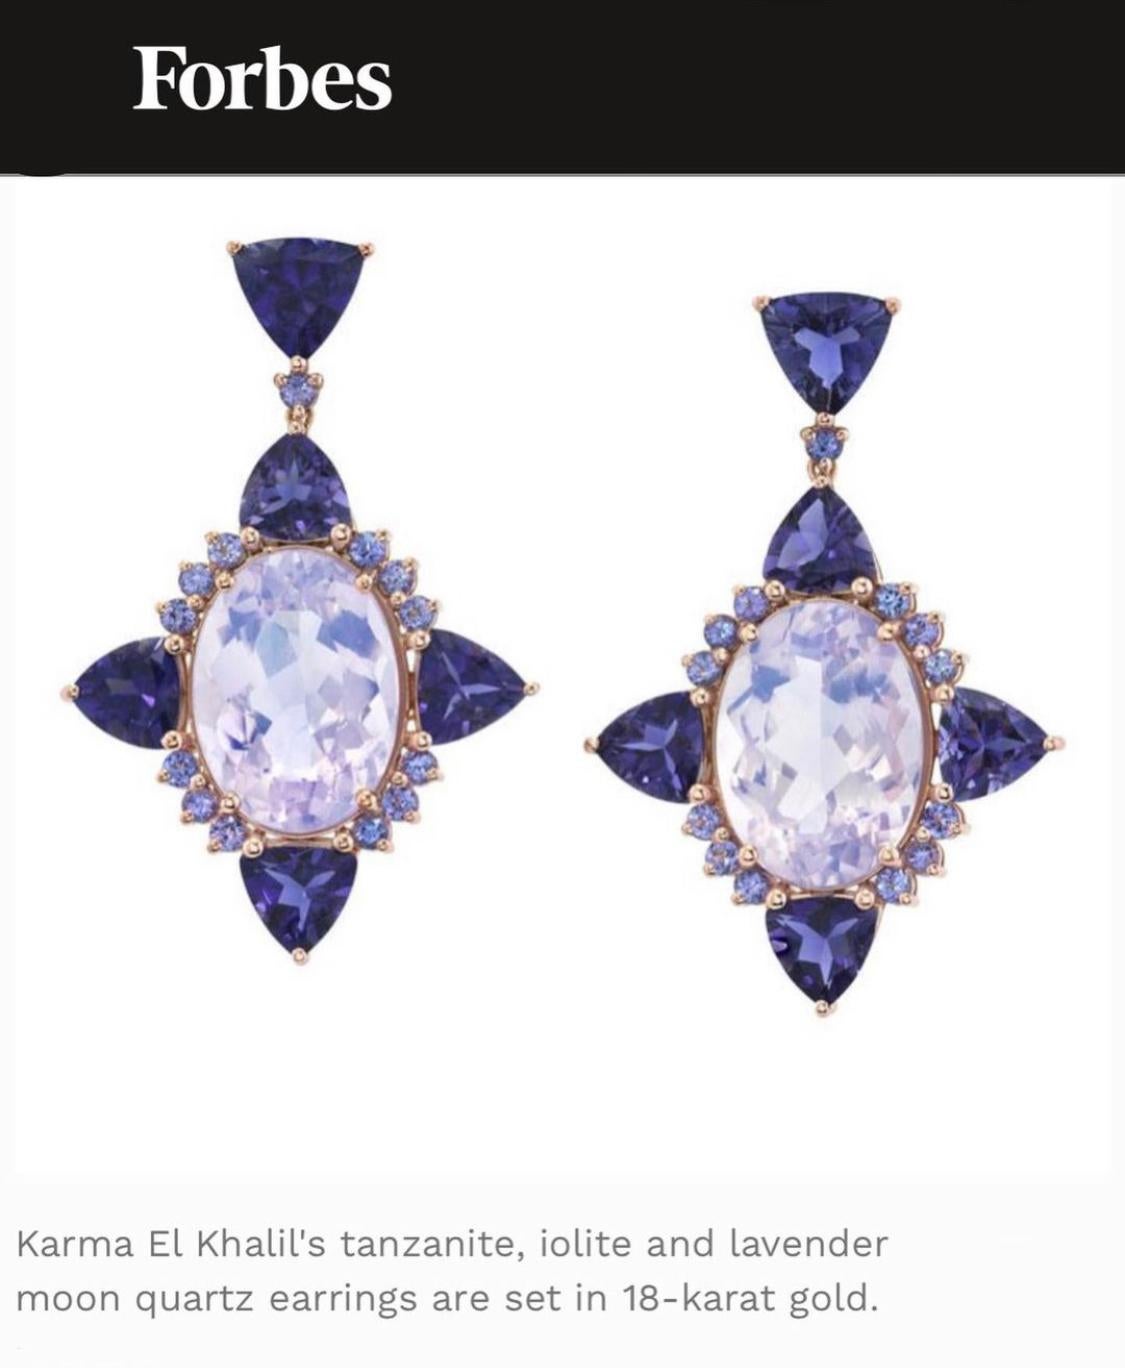 Brilliant hues of violet, indigo and lavender are celebrated in Karma El Khalil's Lilac Nova Earrings. Each earring is an elegant waterfall of Lavender Quartz, Iolite and Tanzanite, Custom-Cut Trillion, Round & Oval stones set in 18K Rose